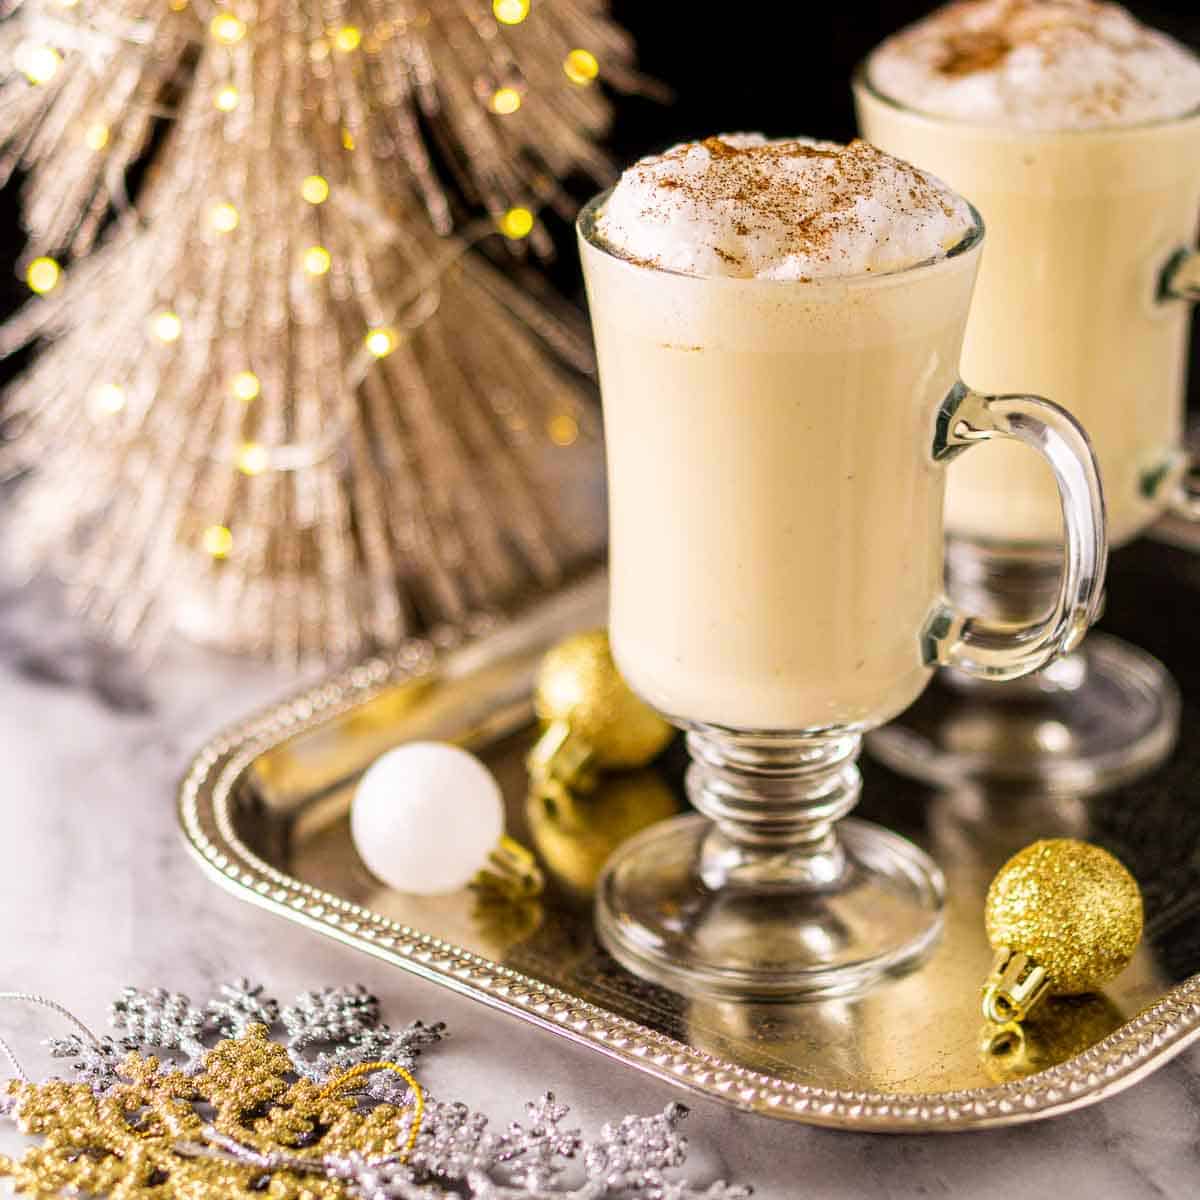 glasses of Baileys egg nog on a serving tray with Christmas ornaments.